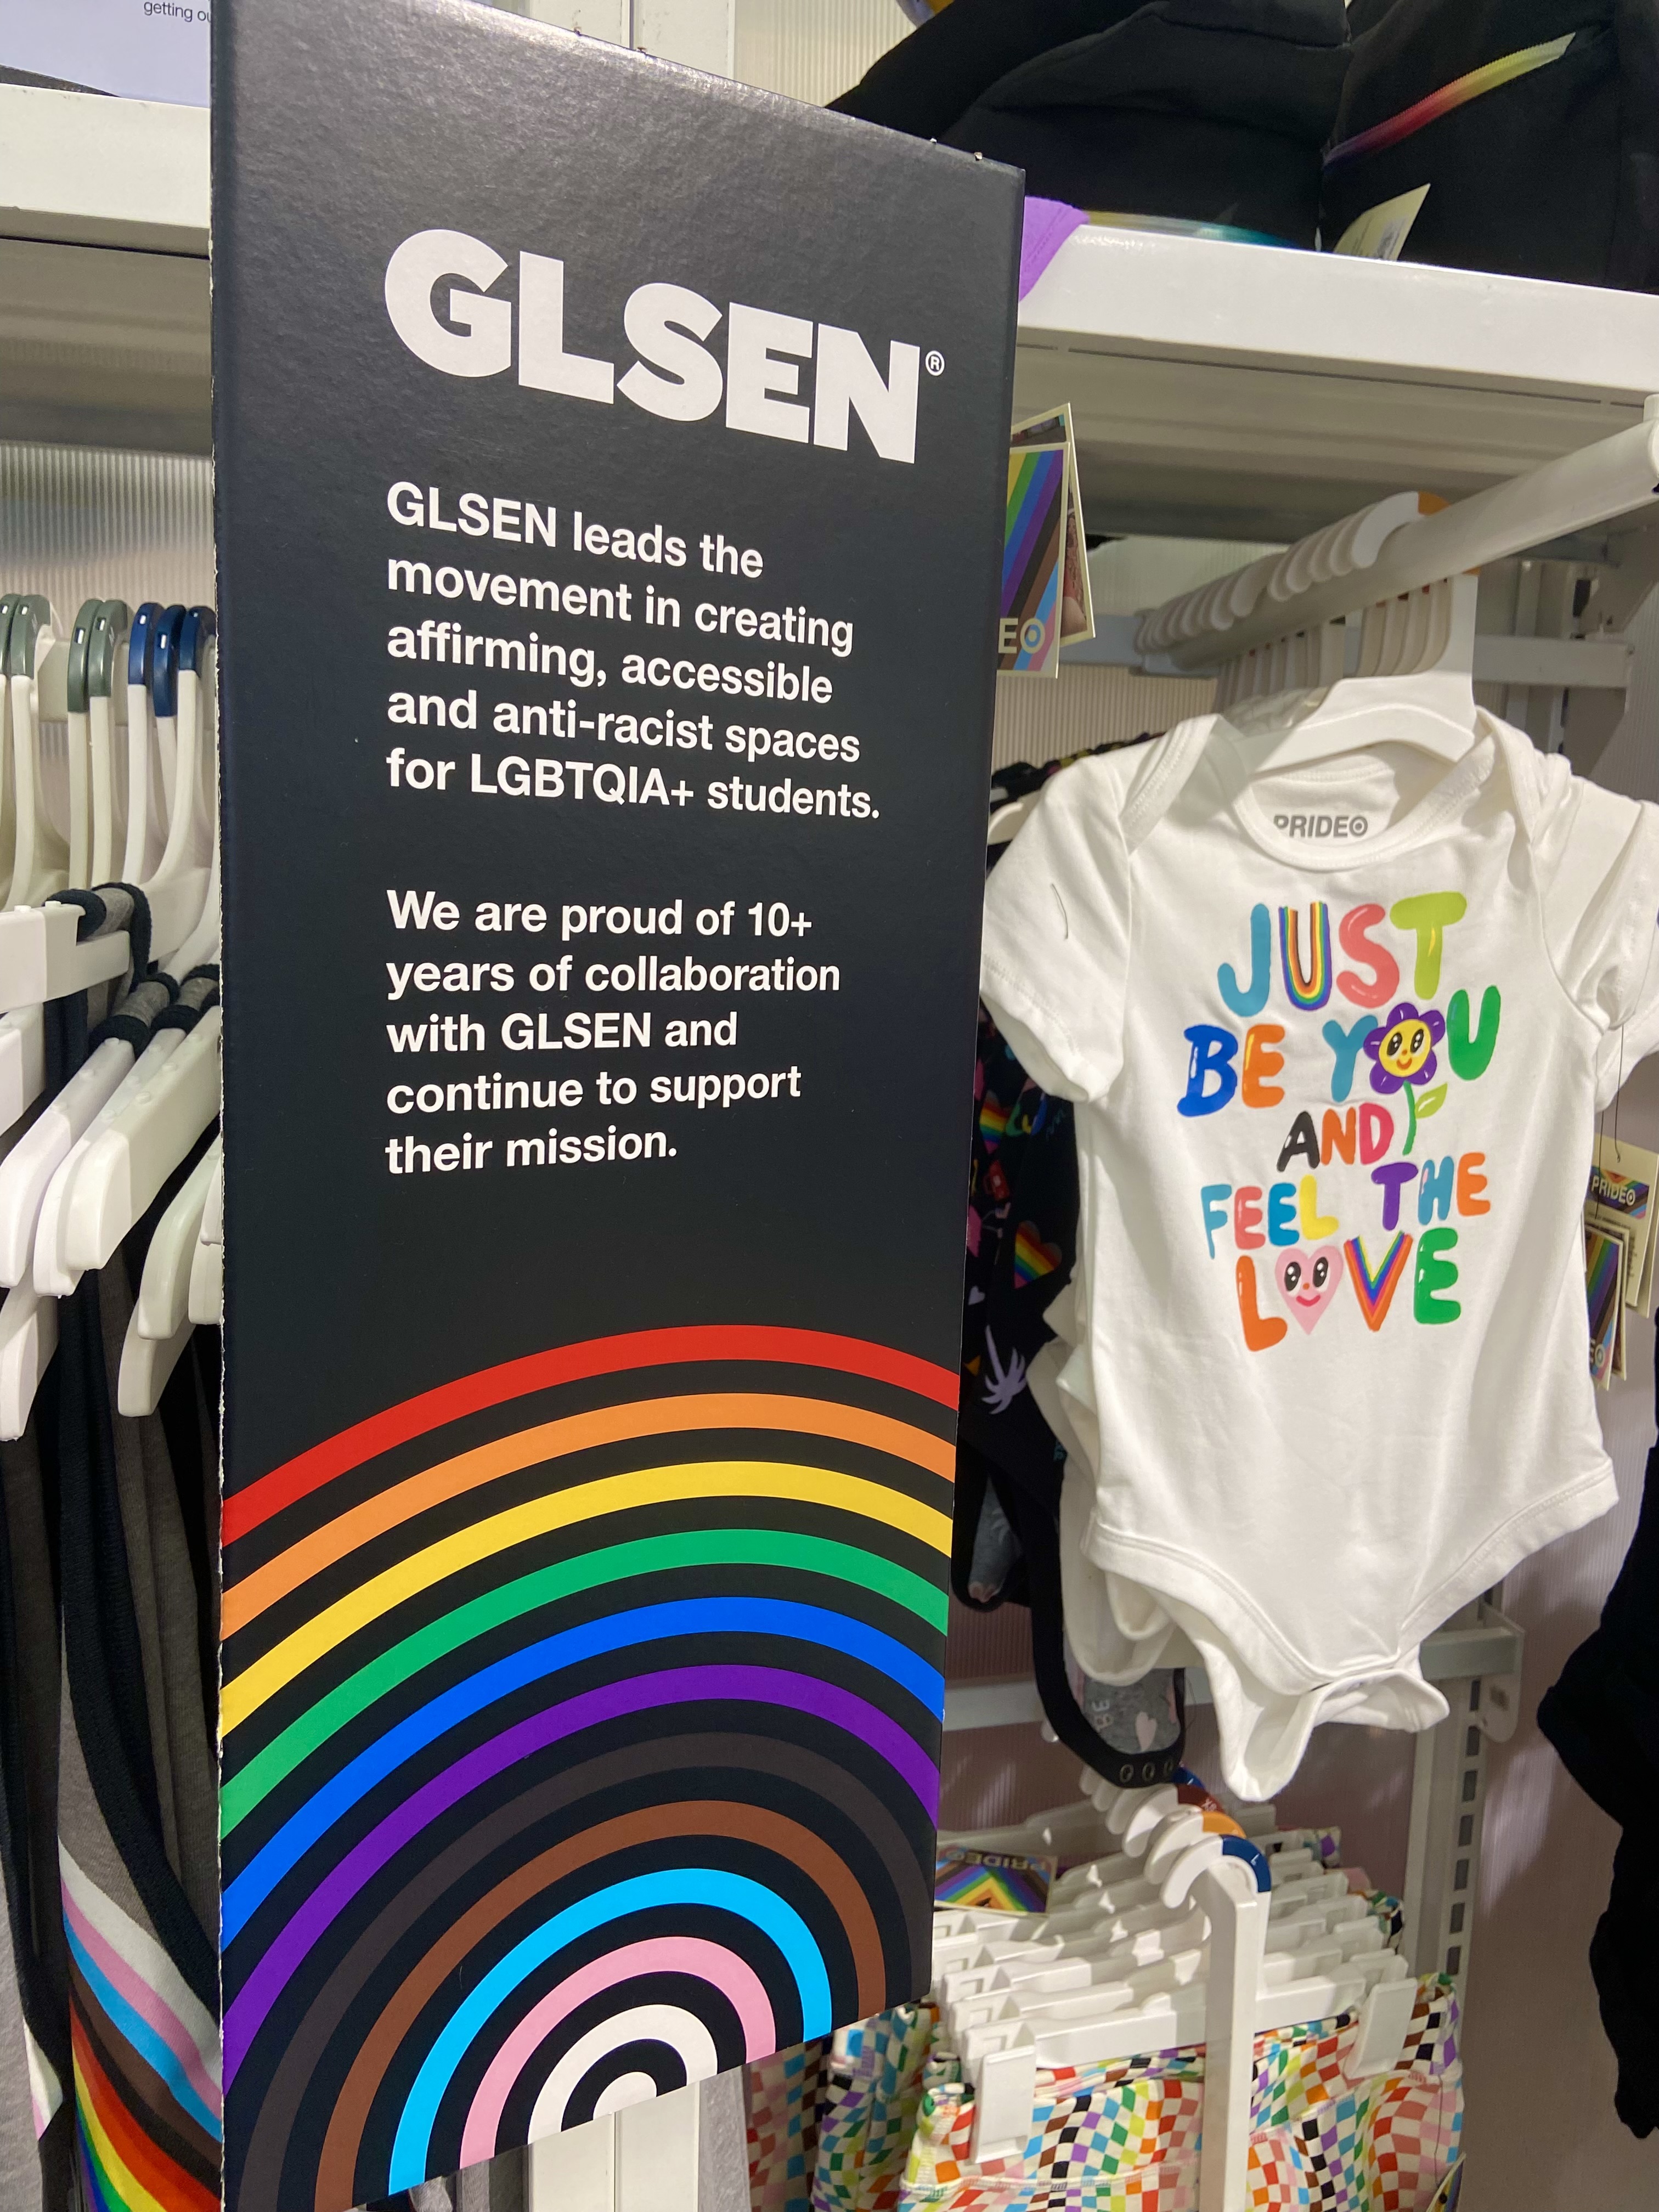 A sign posted on a rack of apparel for children promotes GLSEN, which "leads the movement in creating affirming, accessible and anti-racist spaces for LGBTQIA+ students.